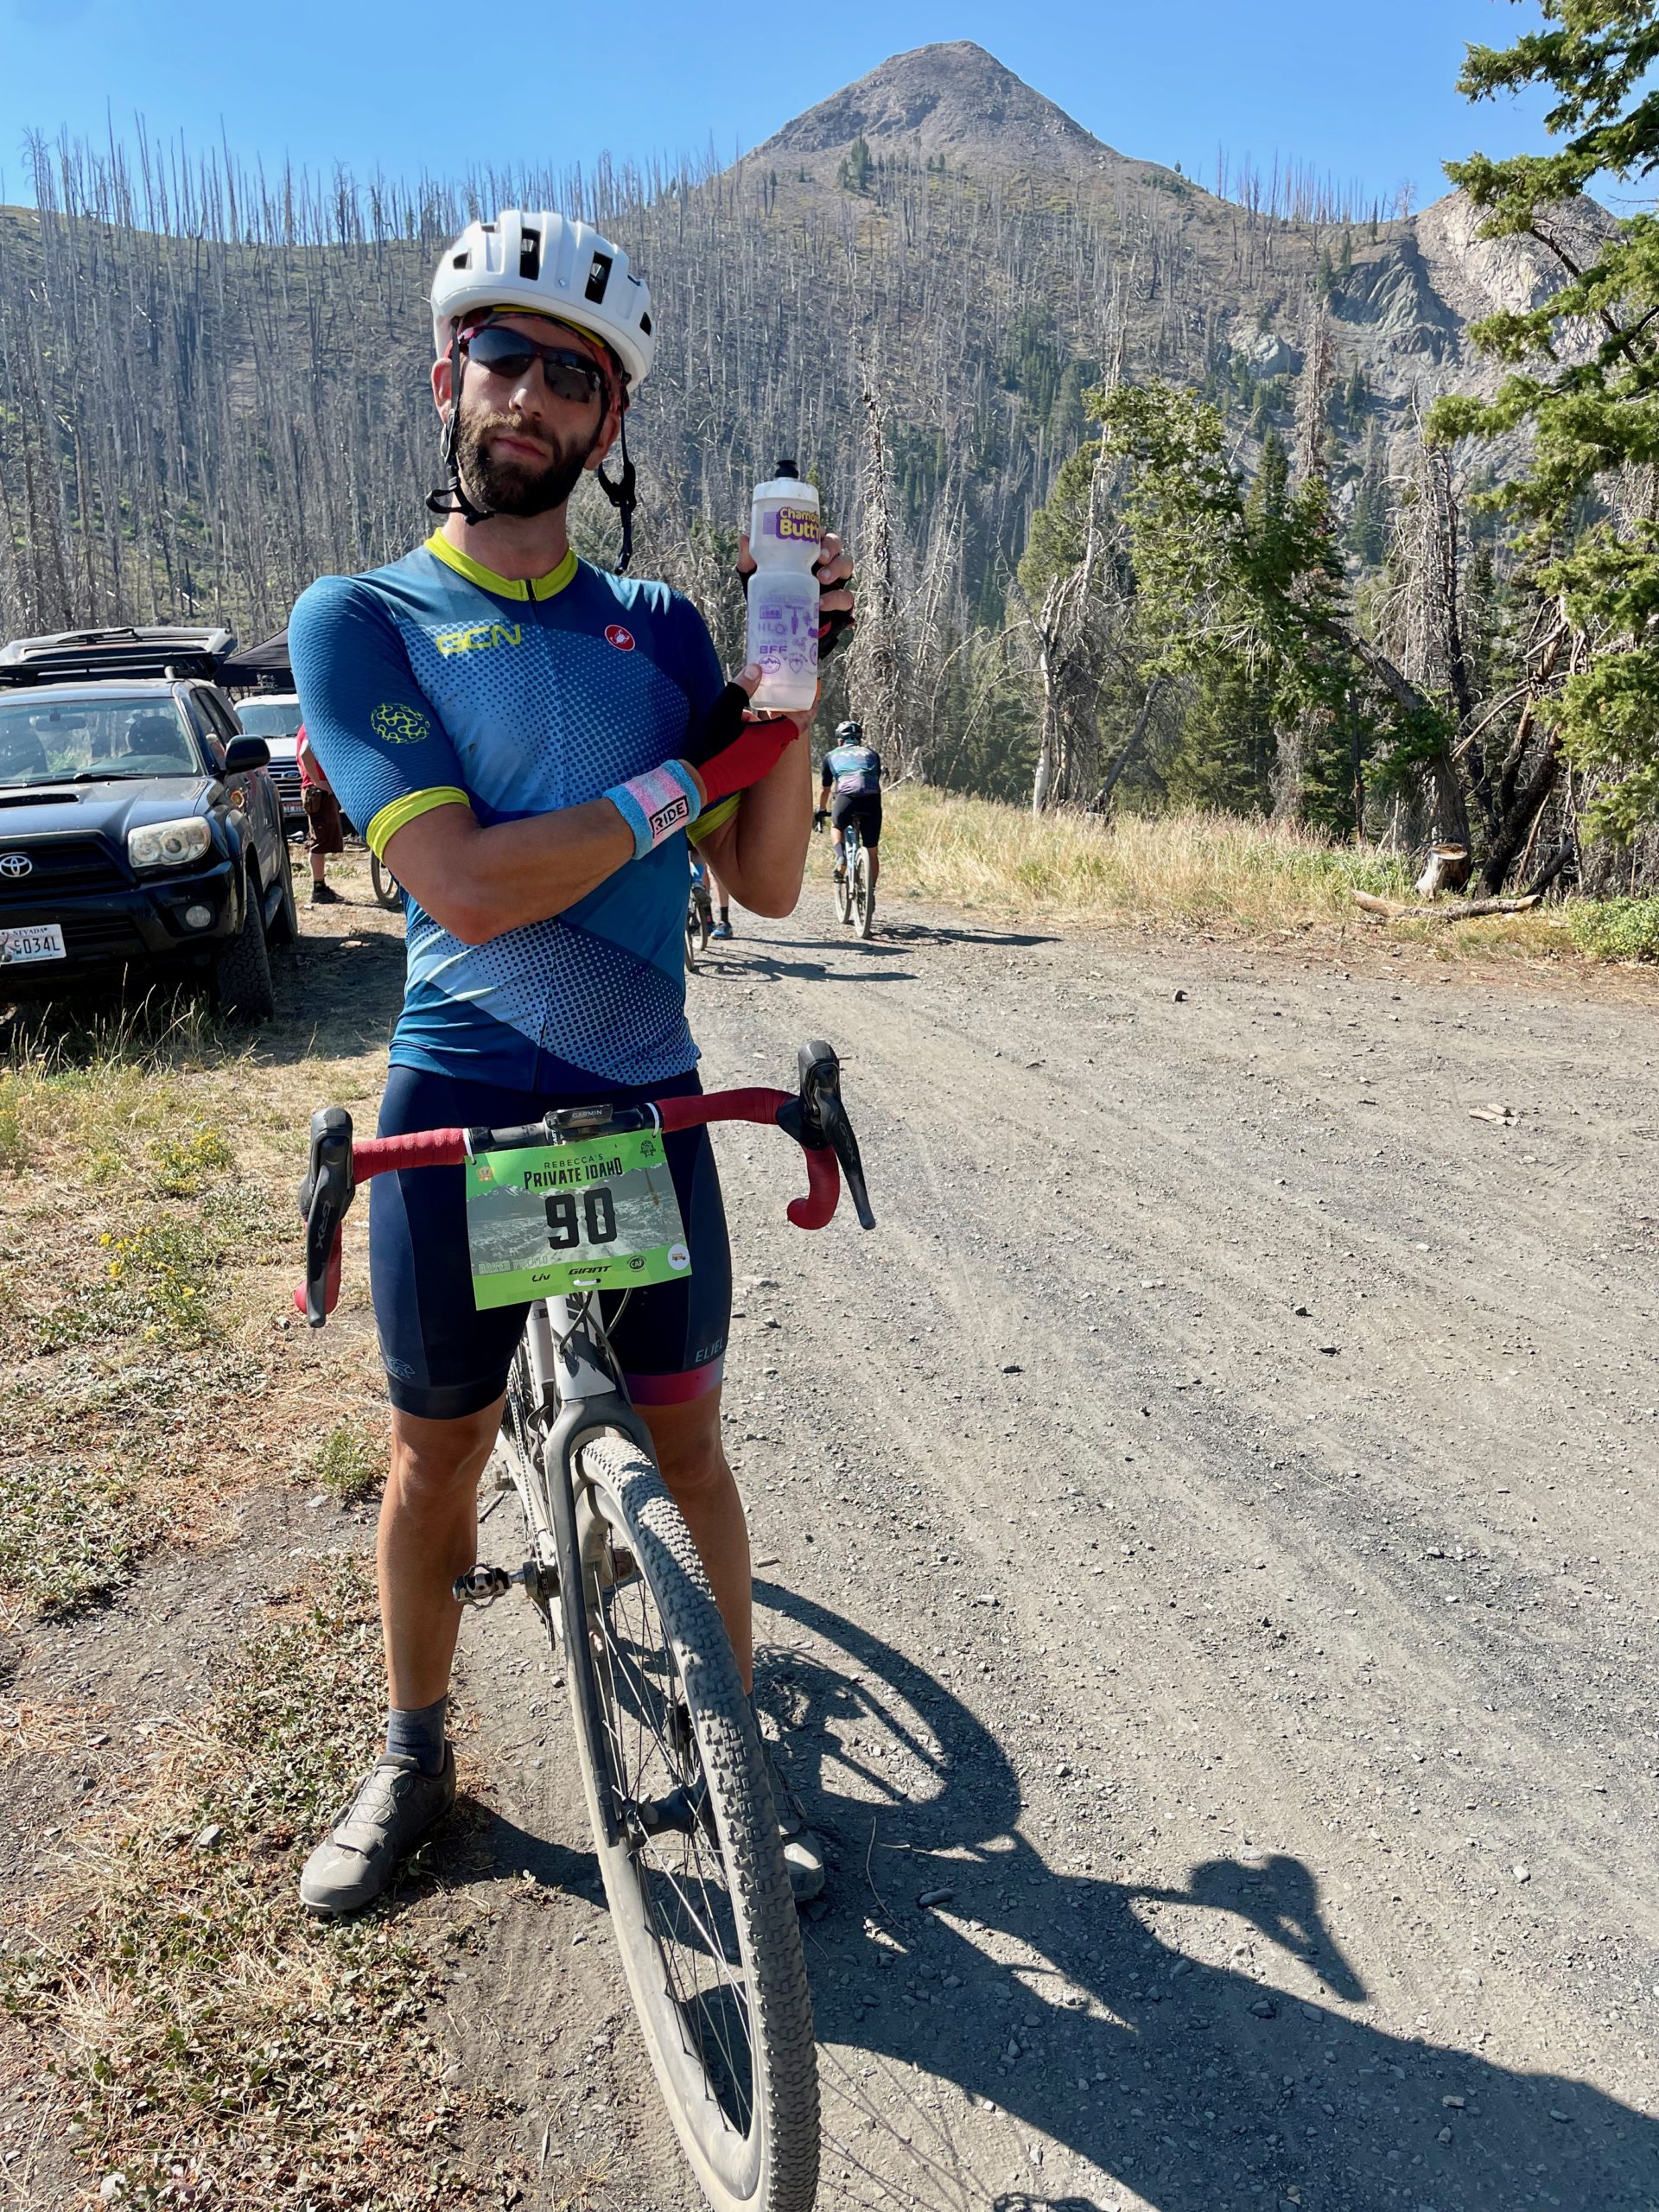 Man standing over bike on dirt road holds a water bottle from Chamois Butt'r